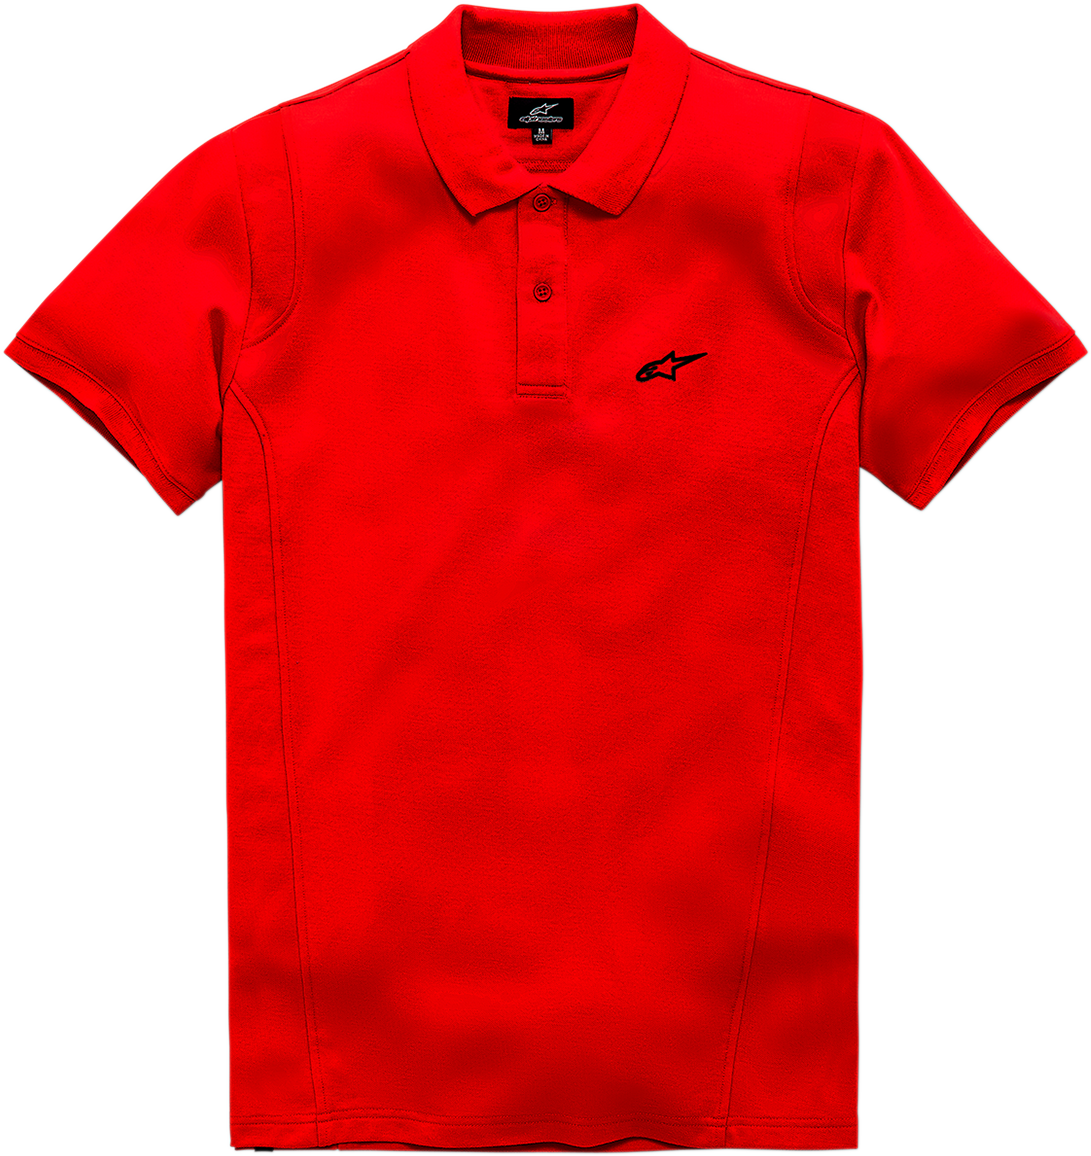 ALPINESTARS (CASUALS) - POLO CAPITAL RED M - 8033637129891